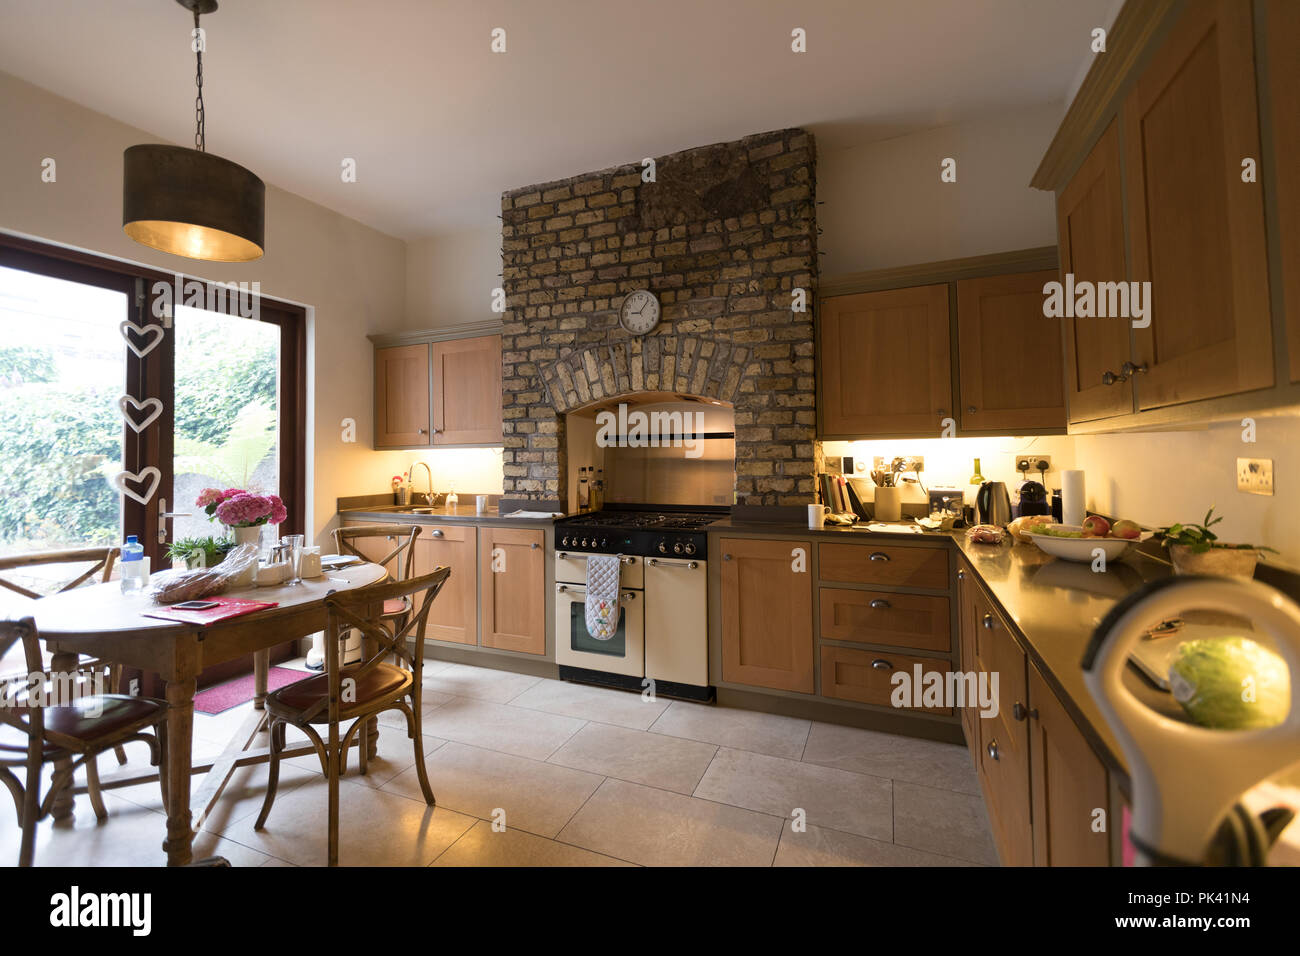 Interior of kitchen at home Stock Photo